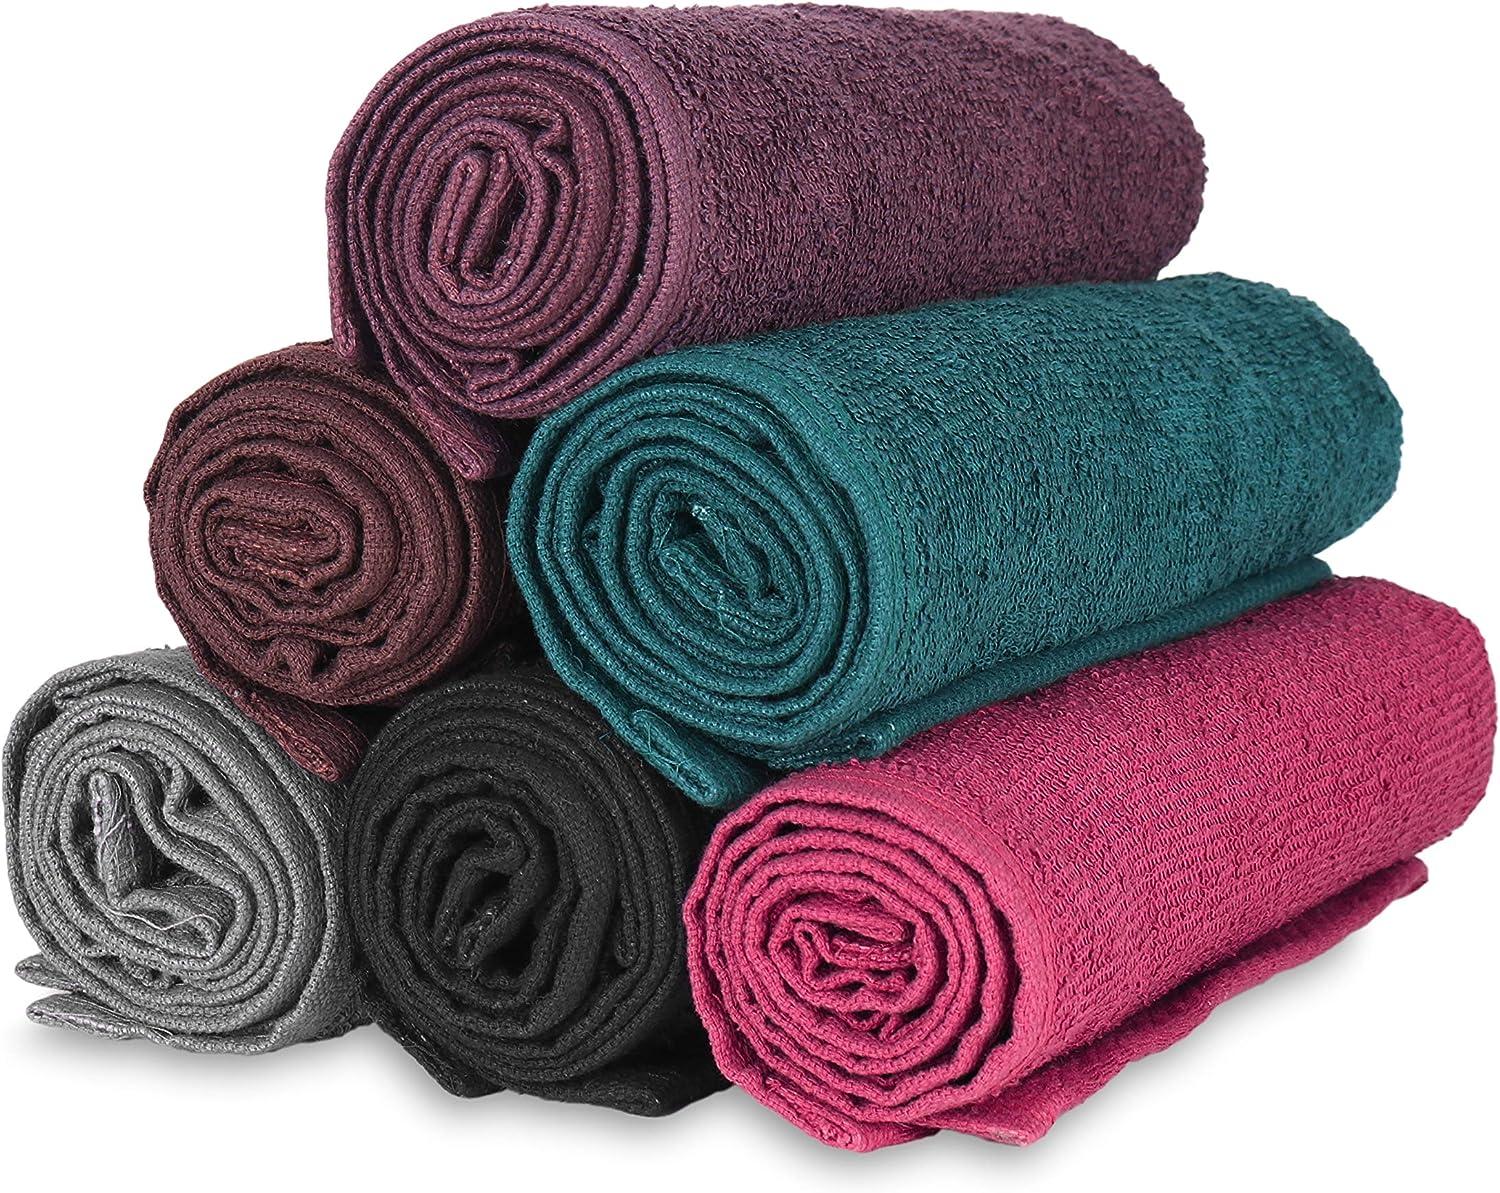 Arkwright Bleach Safe Salon Towel - (Pack of 12) 100% Ring Spun Cotton  Super Soft, Lightweight, Quick Dry, Absorbent Hand Towels, Perfect for Spa,  Facials, Gym, Cosmetology, 16 x 28 in, Charcoal Charcoal 16 x 28 Inch (12  Pack)